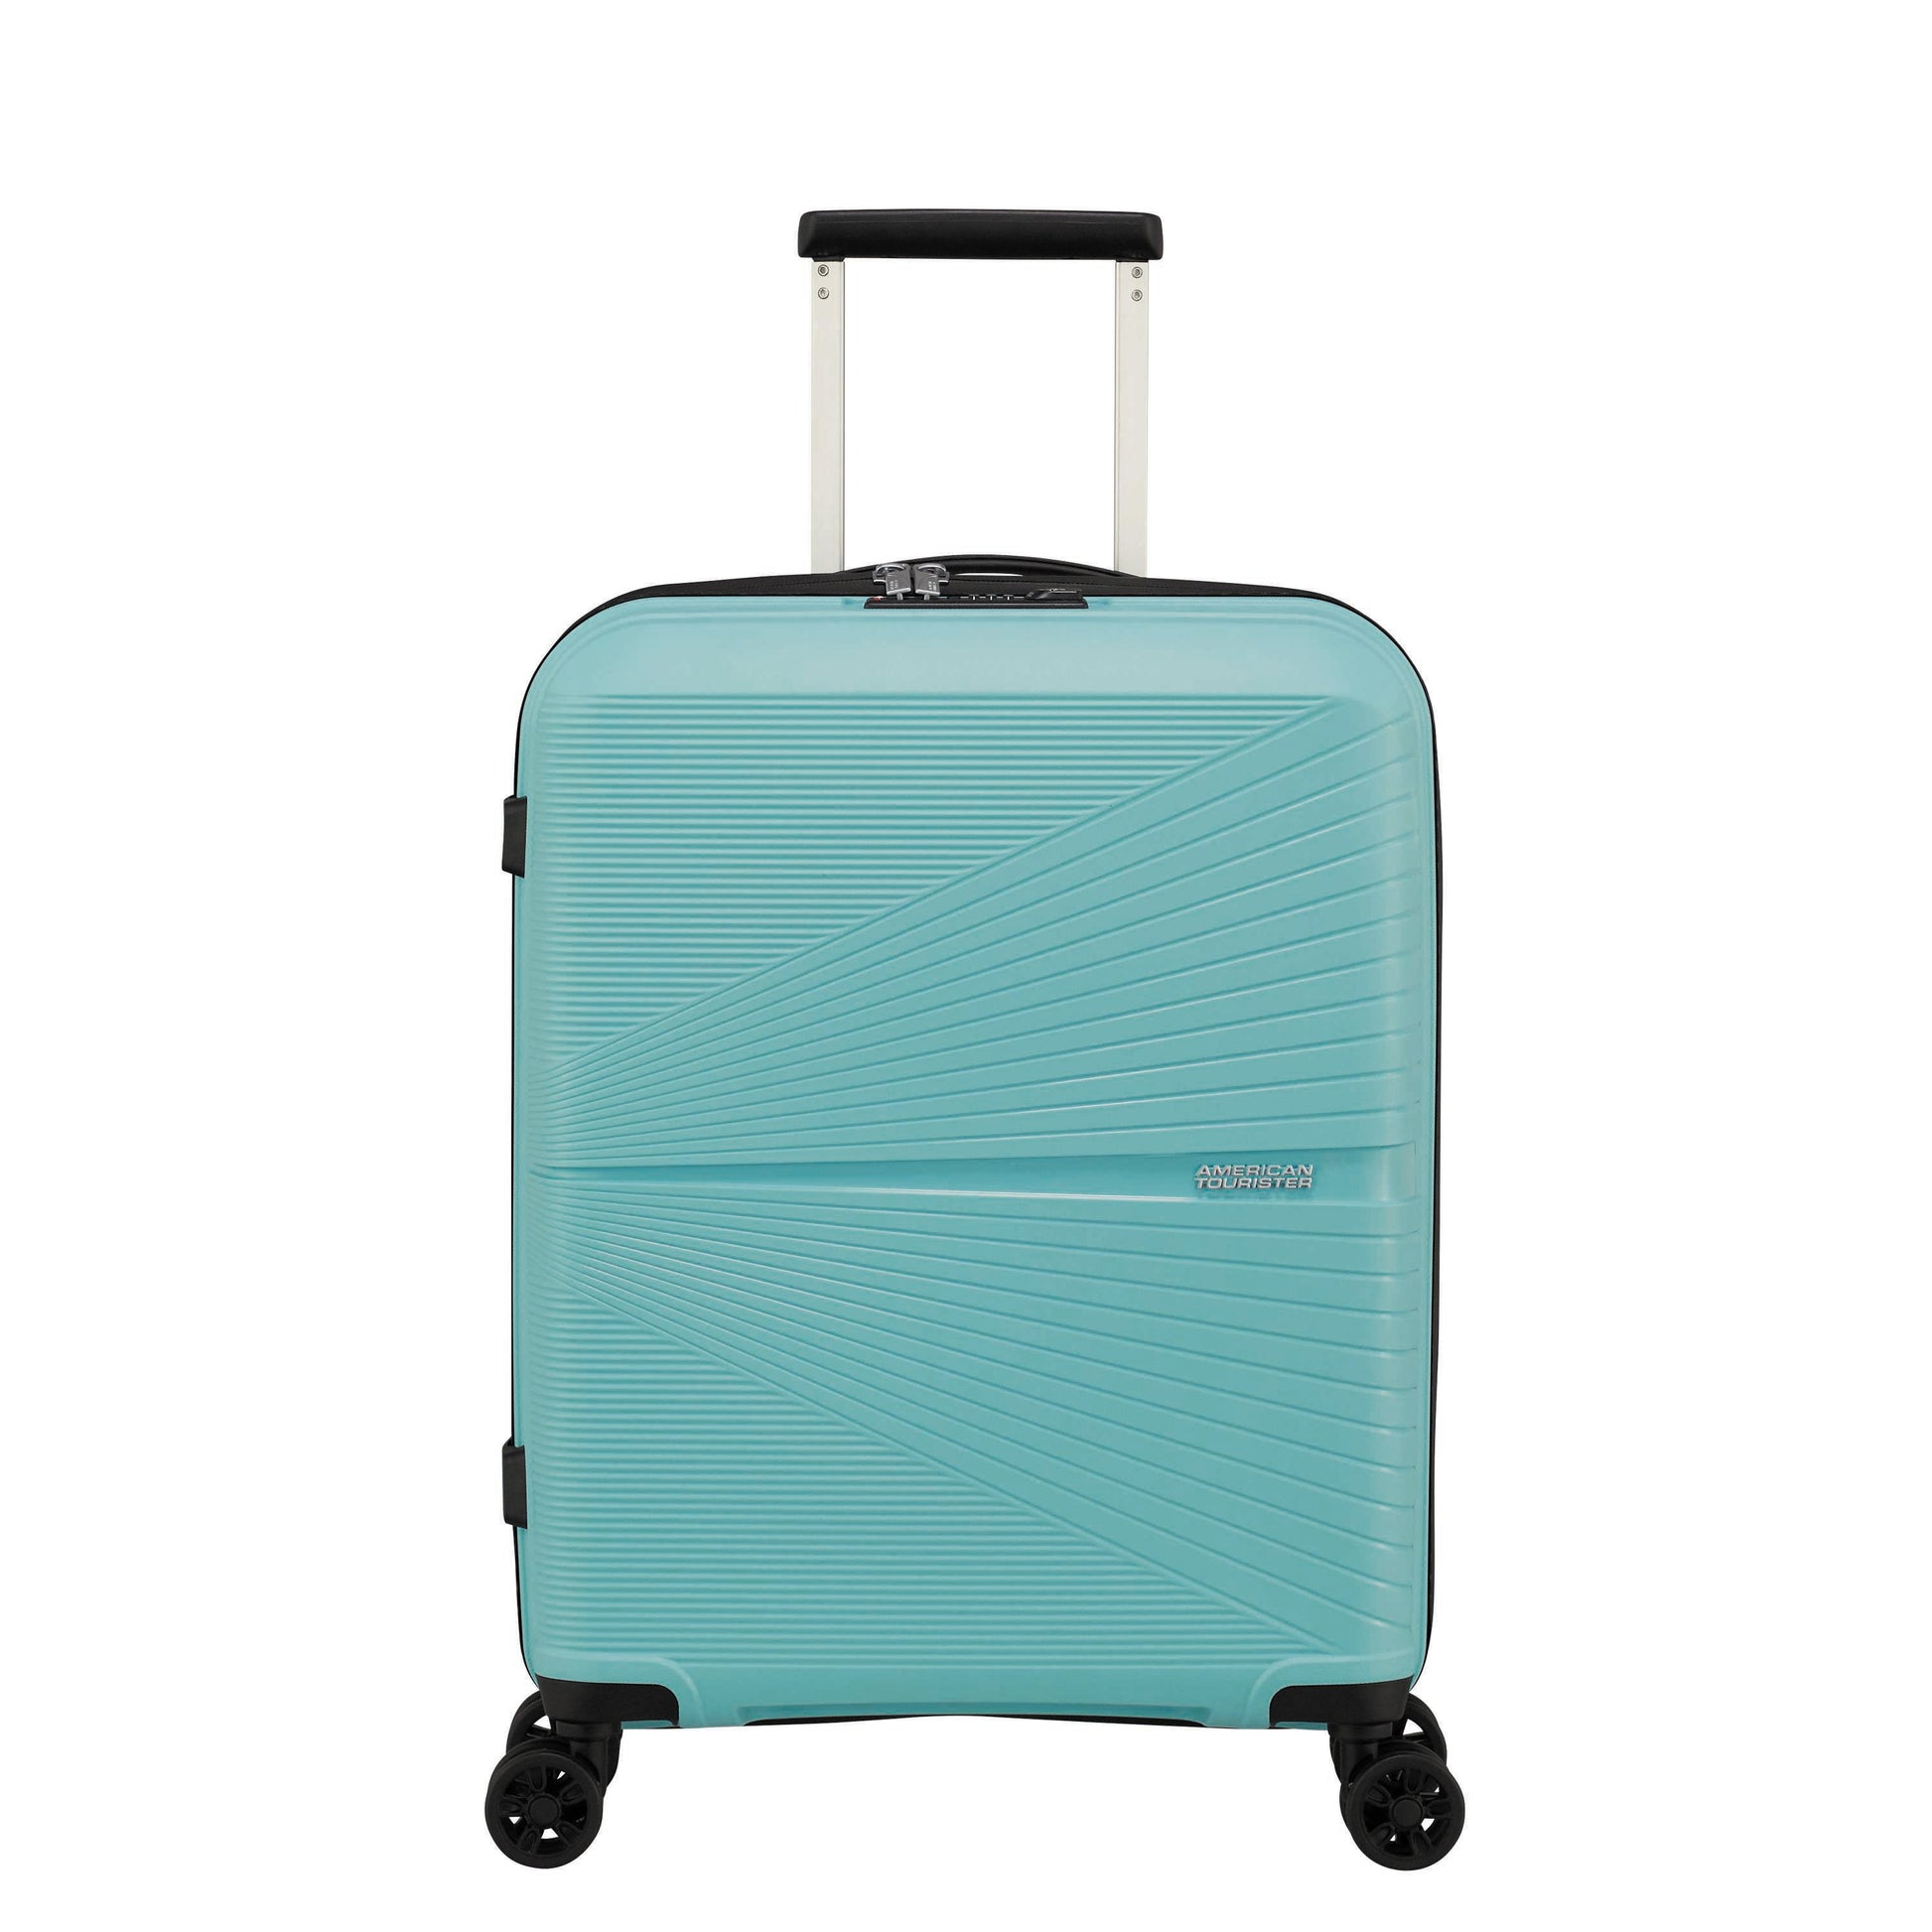 American Tourister Airconic Spinner Carry-On Luggage - Purist Blue